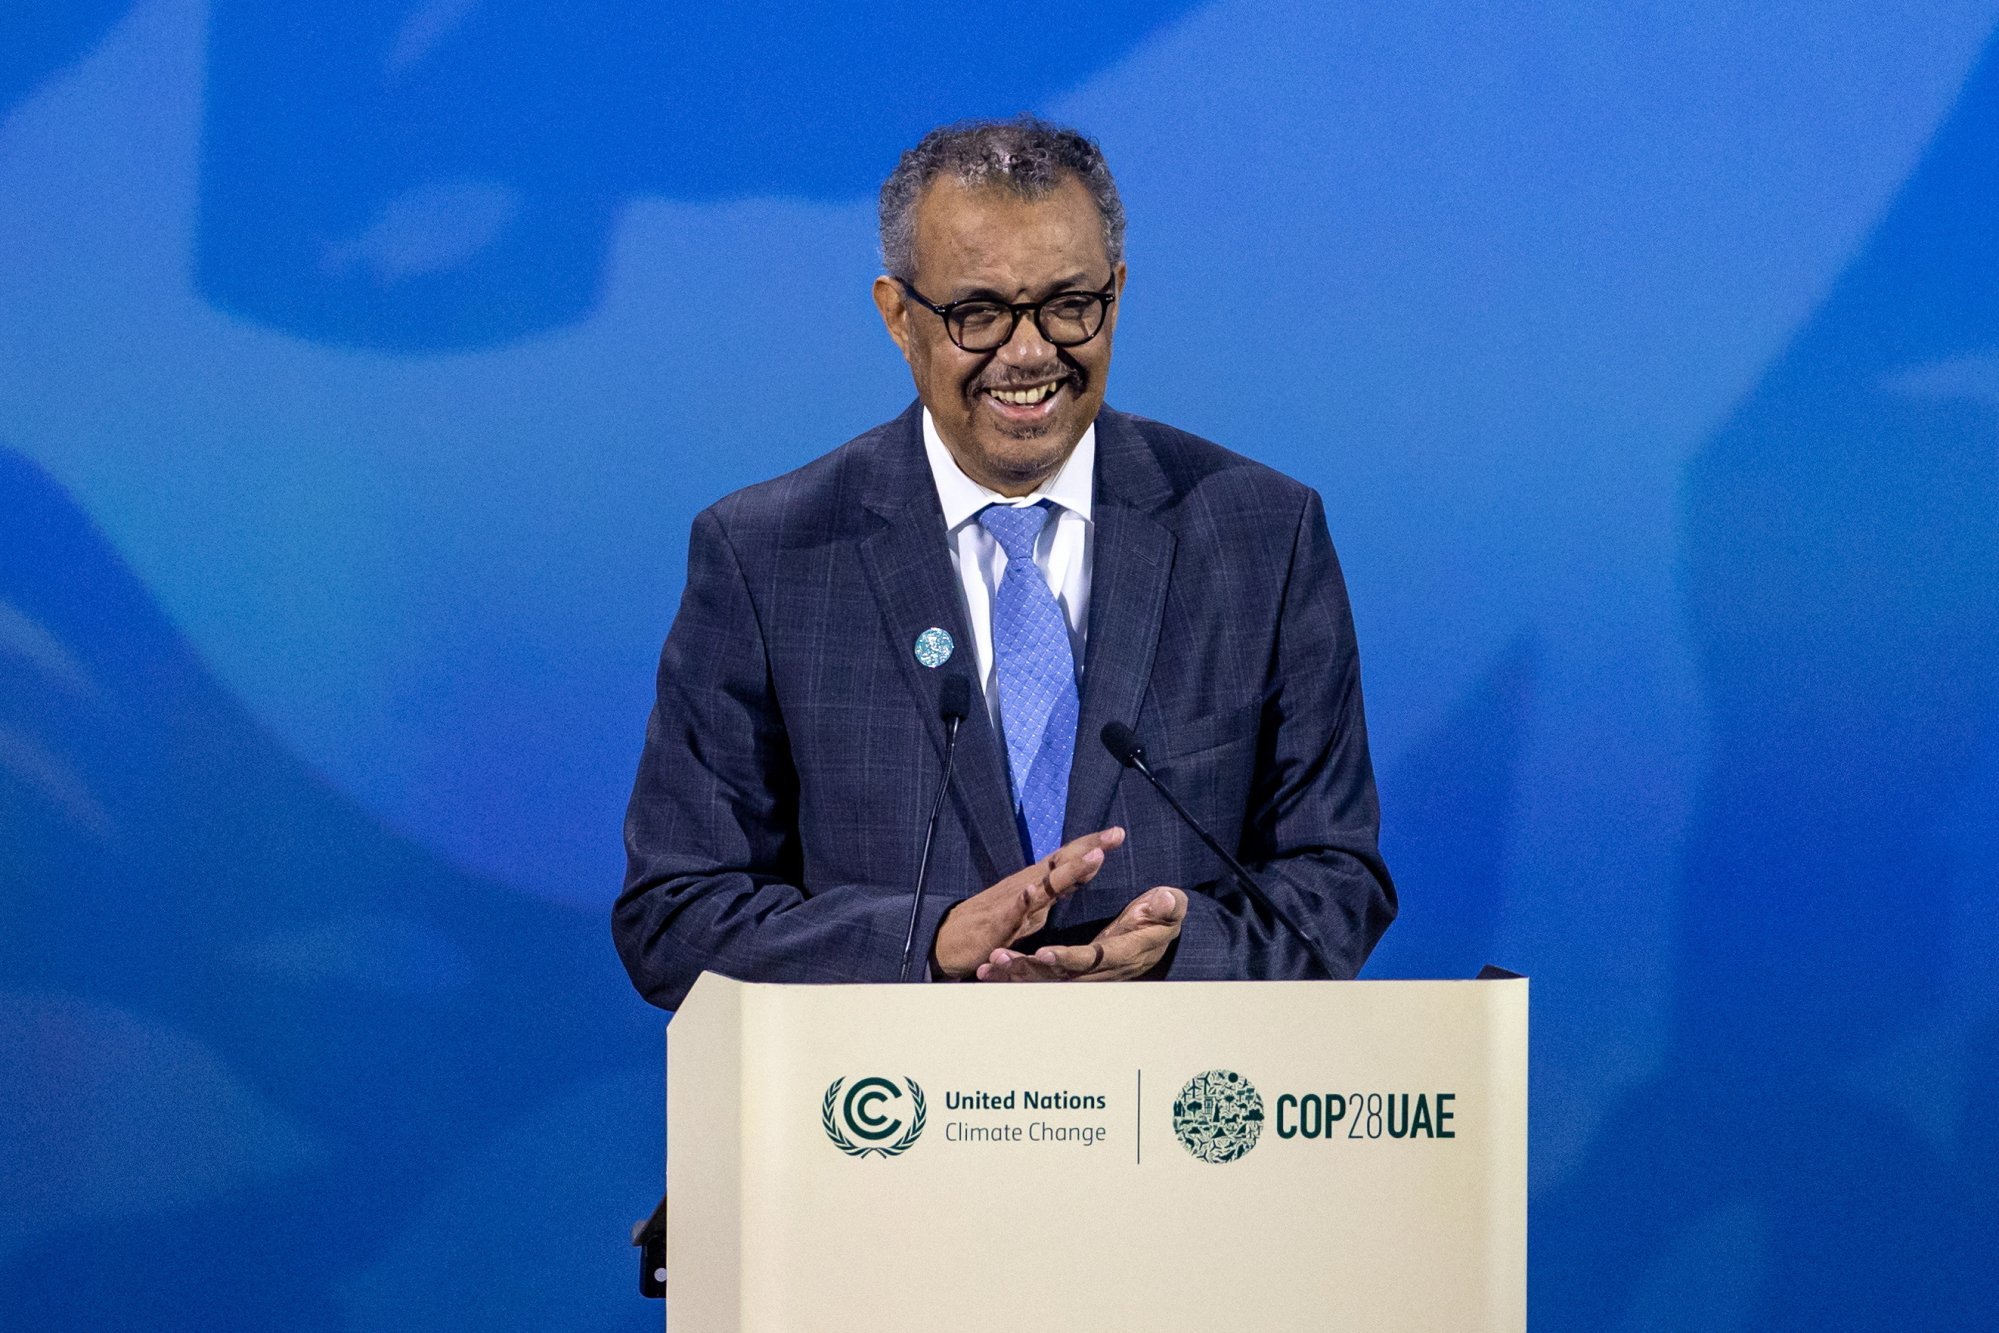 Any attempt by WHO Director General Tedros Adhanom Ghebreyesus to invite Taiwan to the World Health Assembly could be quashed by China, an analyst said. Photo: EPA-EFE